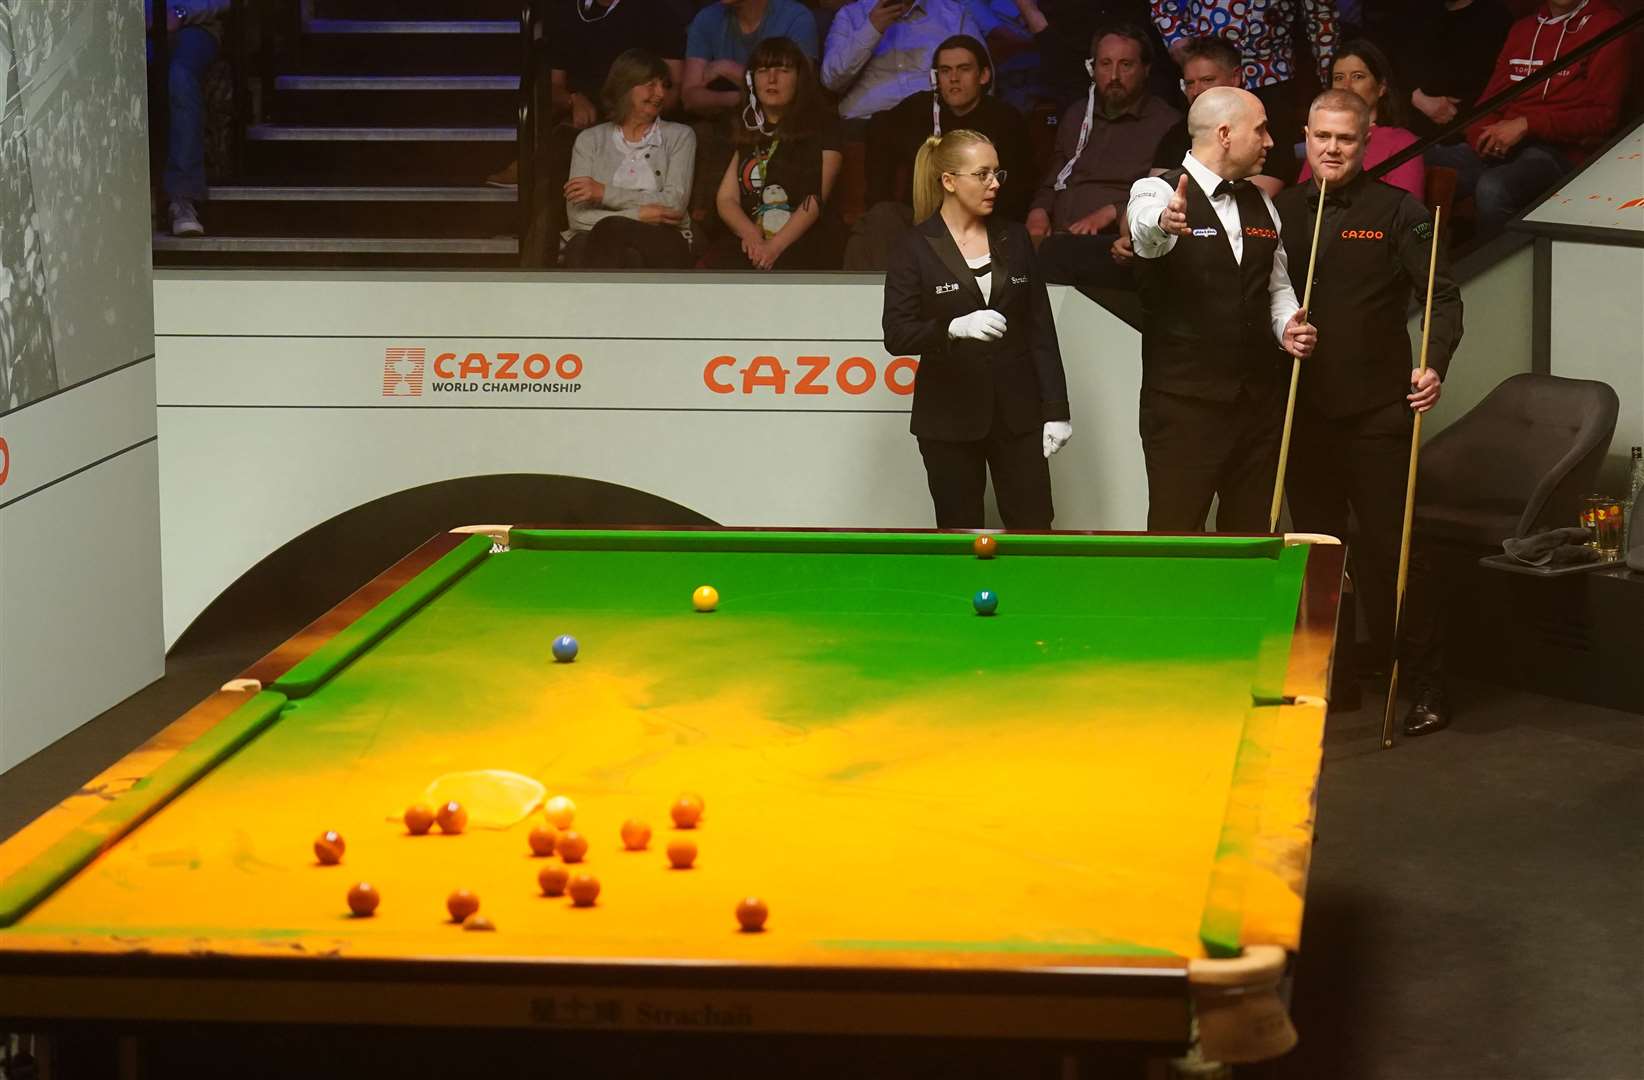 Orange powder on the table after a Just Stop Oil protester jumped on it during a match between Robert Milkins against Joe Perry at the Crucible (PA)